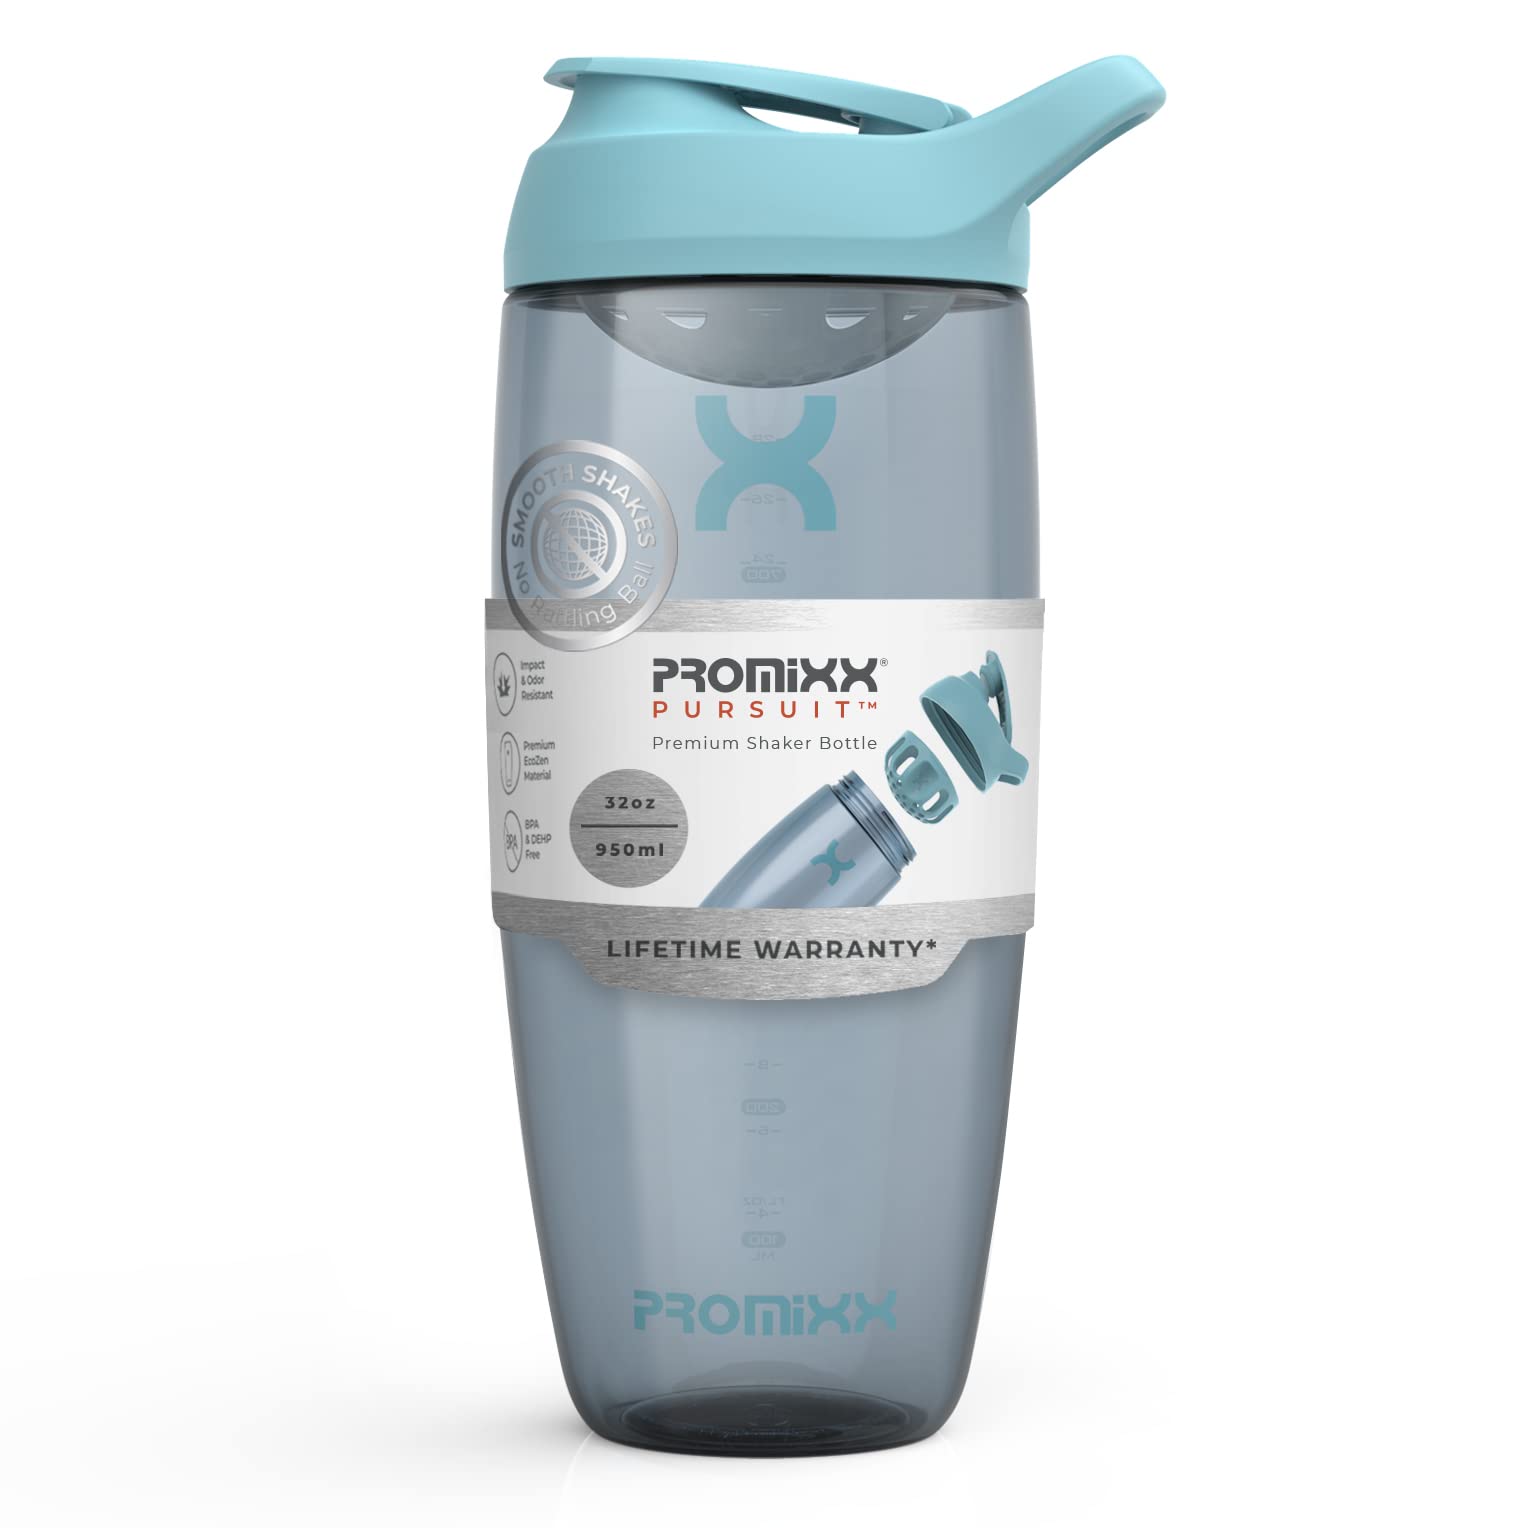 Promixx PURSUIT Protein Shaker Bottle - Premium Sports Blender Bottles for Protein Mixes and Supplement Shakes - Easy clean, Dur